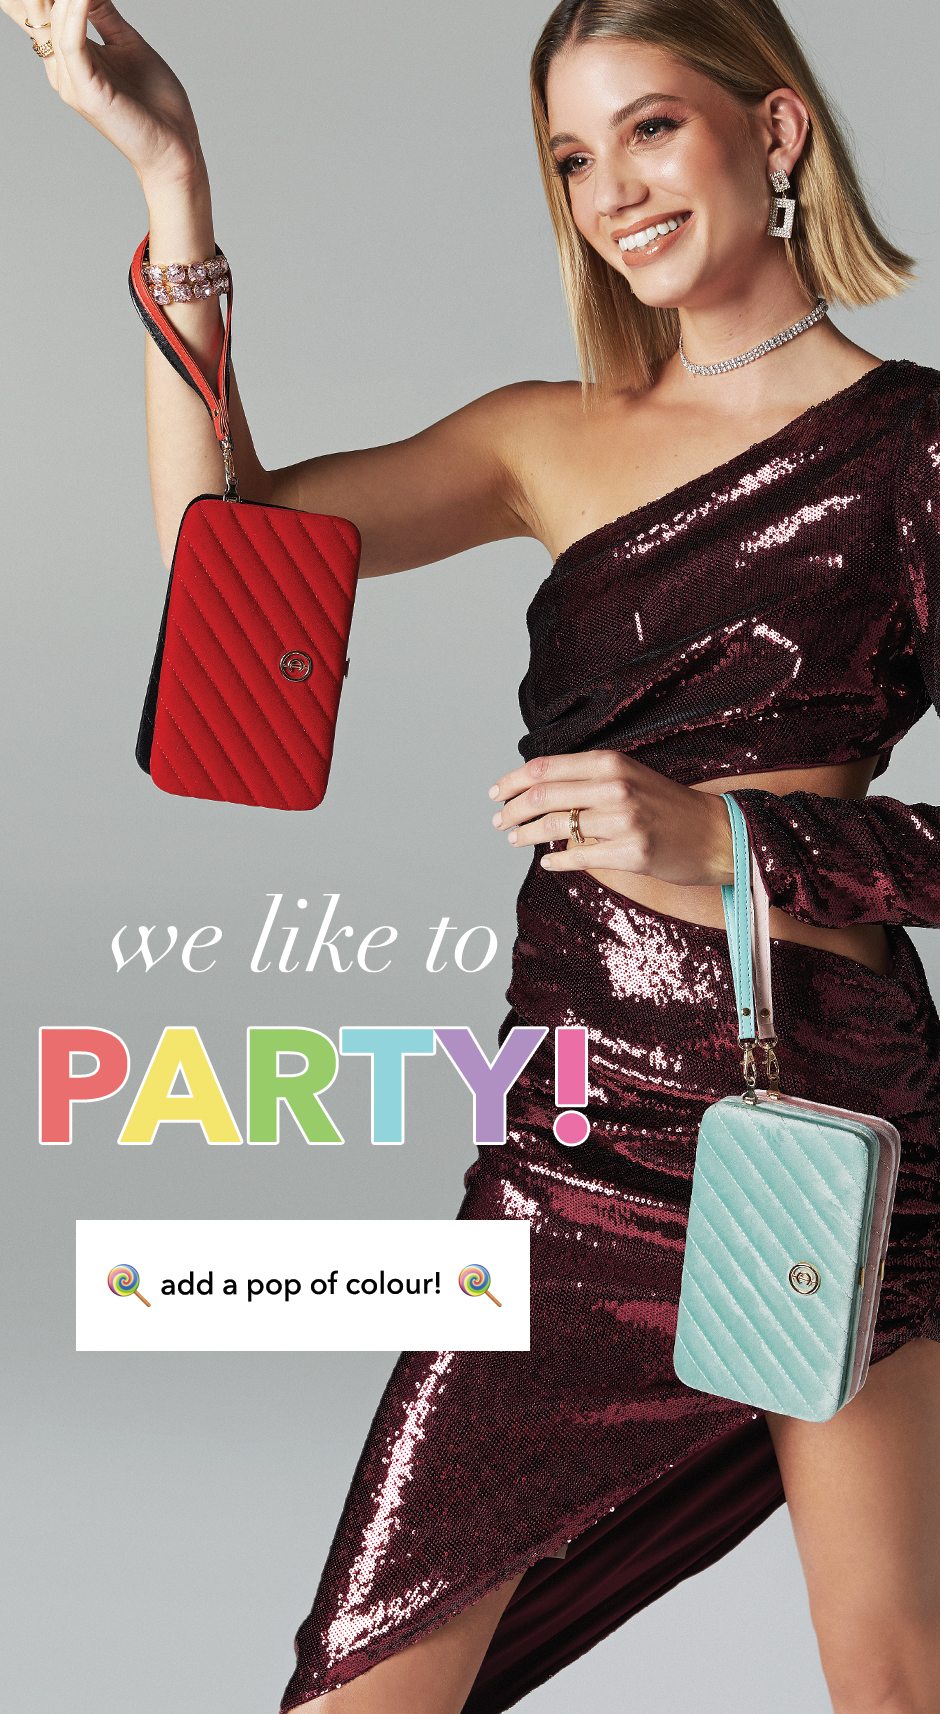 We like to PARTY! Shop now!